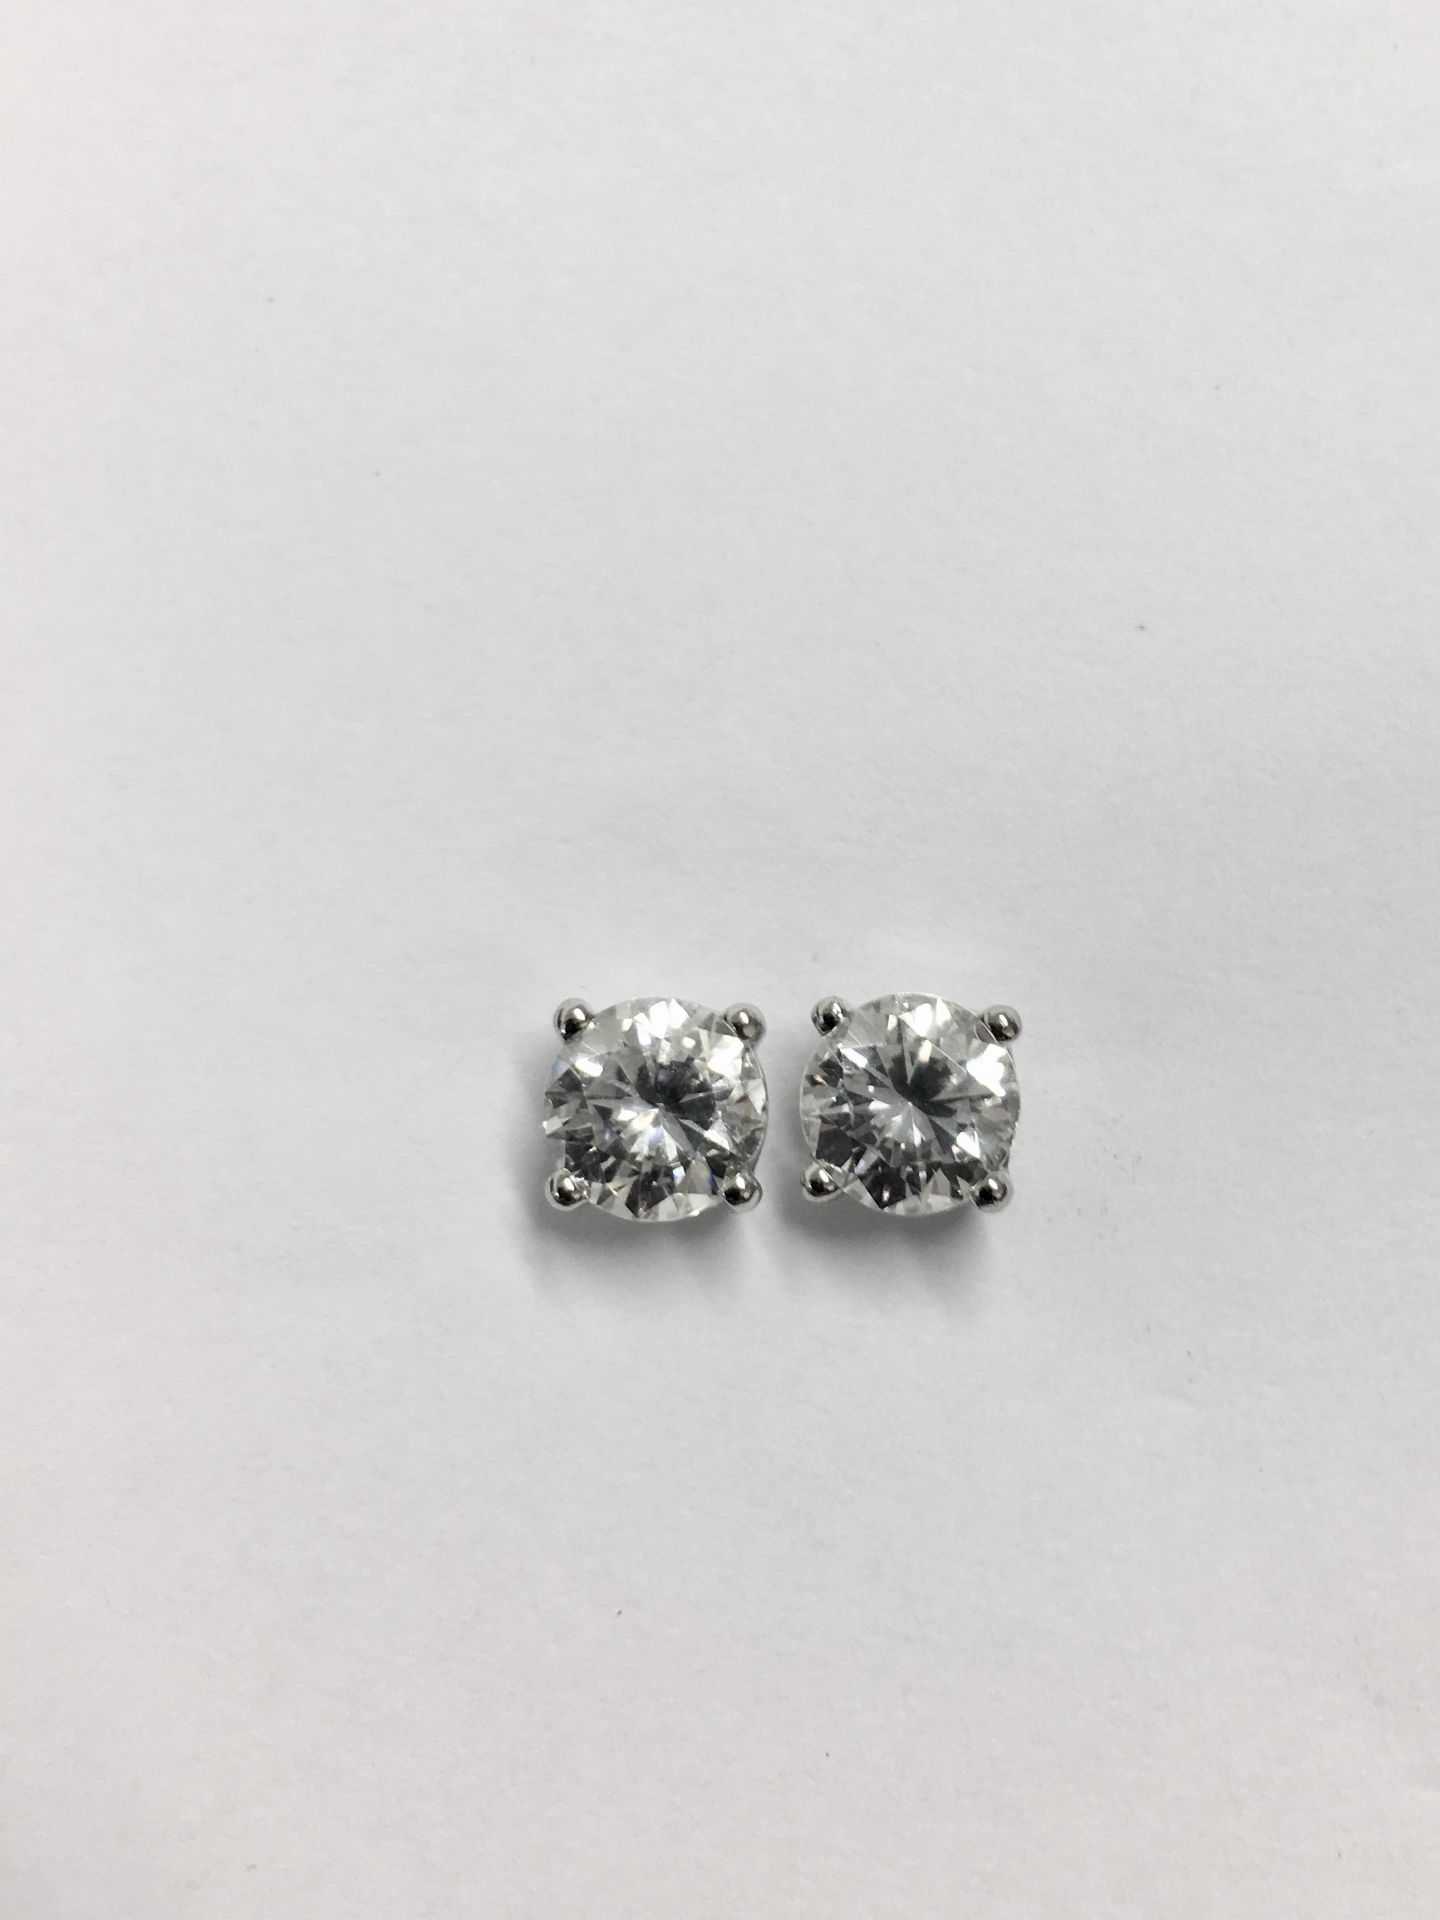 1.20ct diamond solitaire earrings set in 18ct white gold. 2 x brilliant cut diamonds, 0.60ct ( - Image 3 of 3